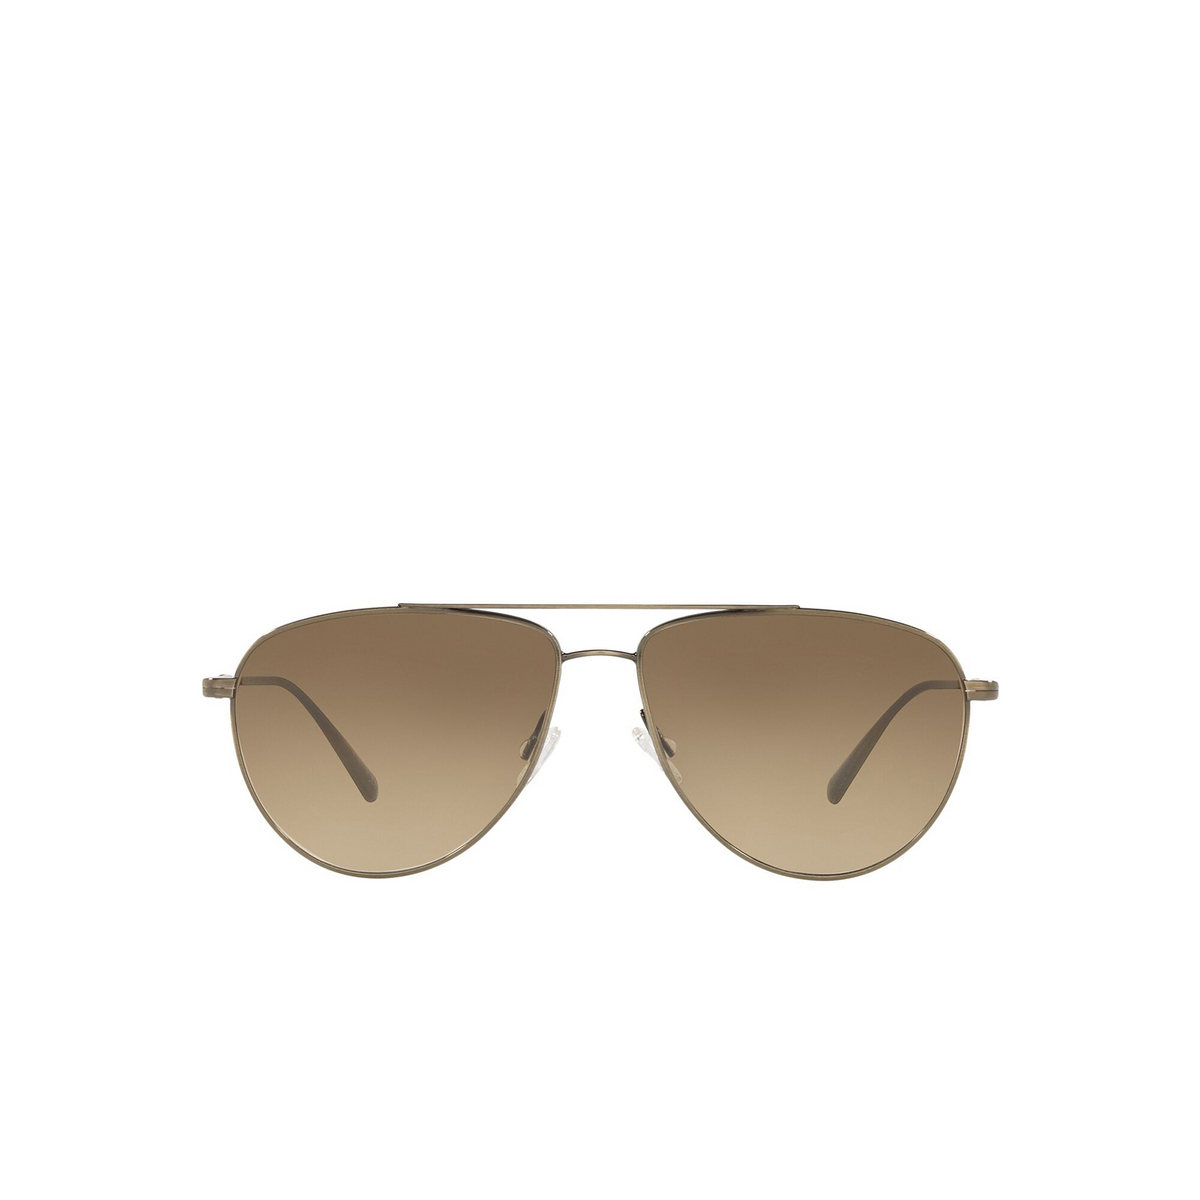 Oliver Peoples DISORIANO Sunglasses 5284Q4 Antique Gold - front view